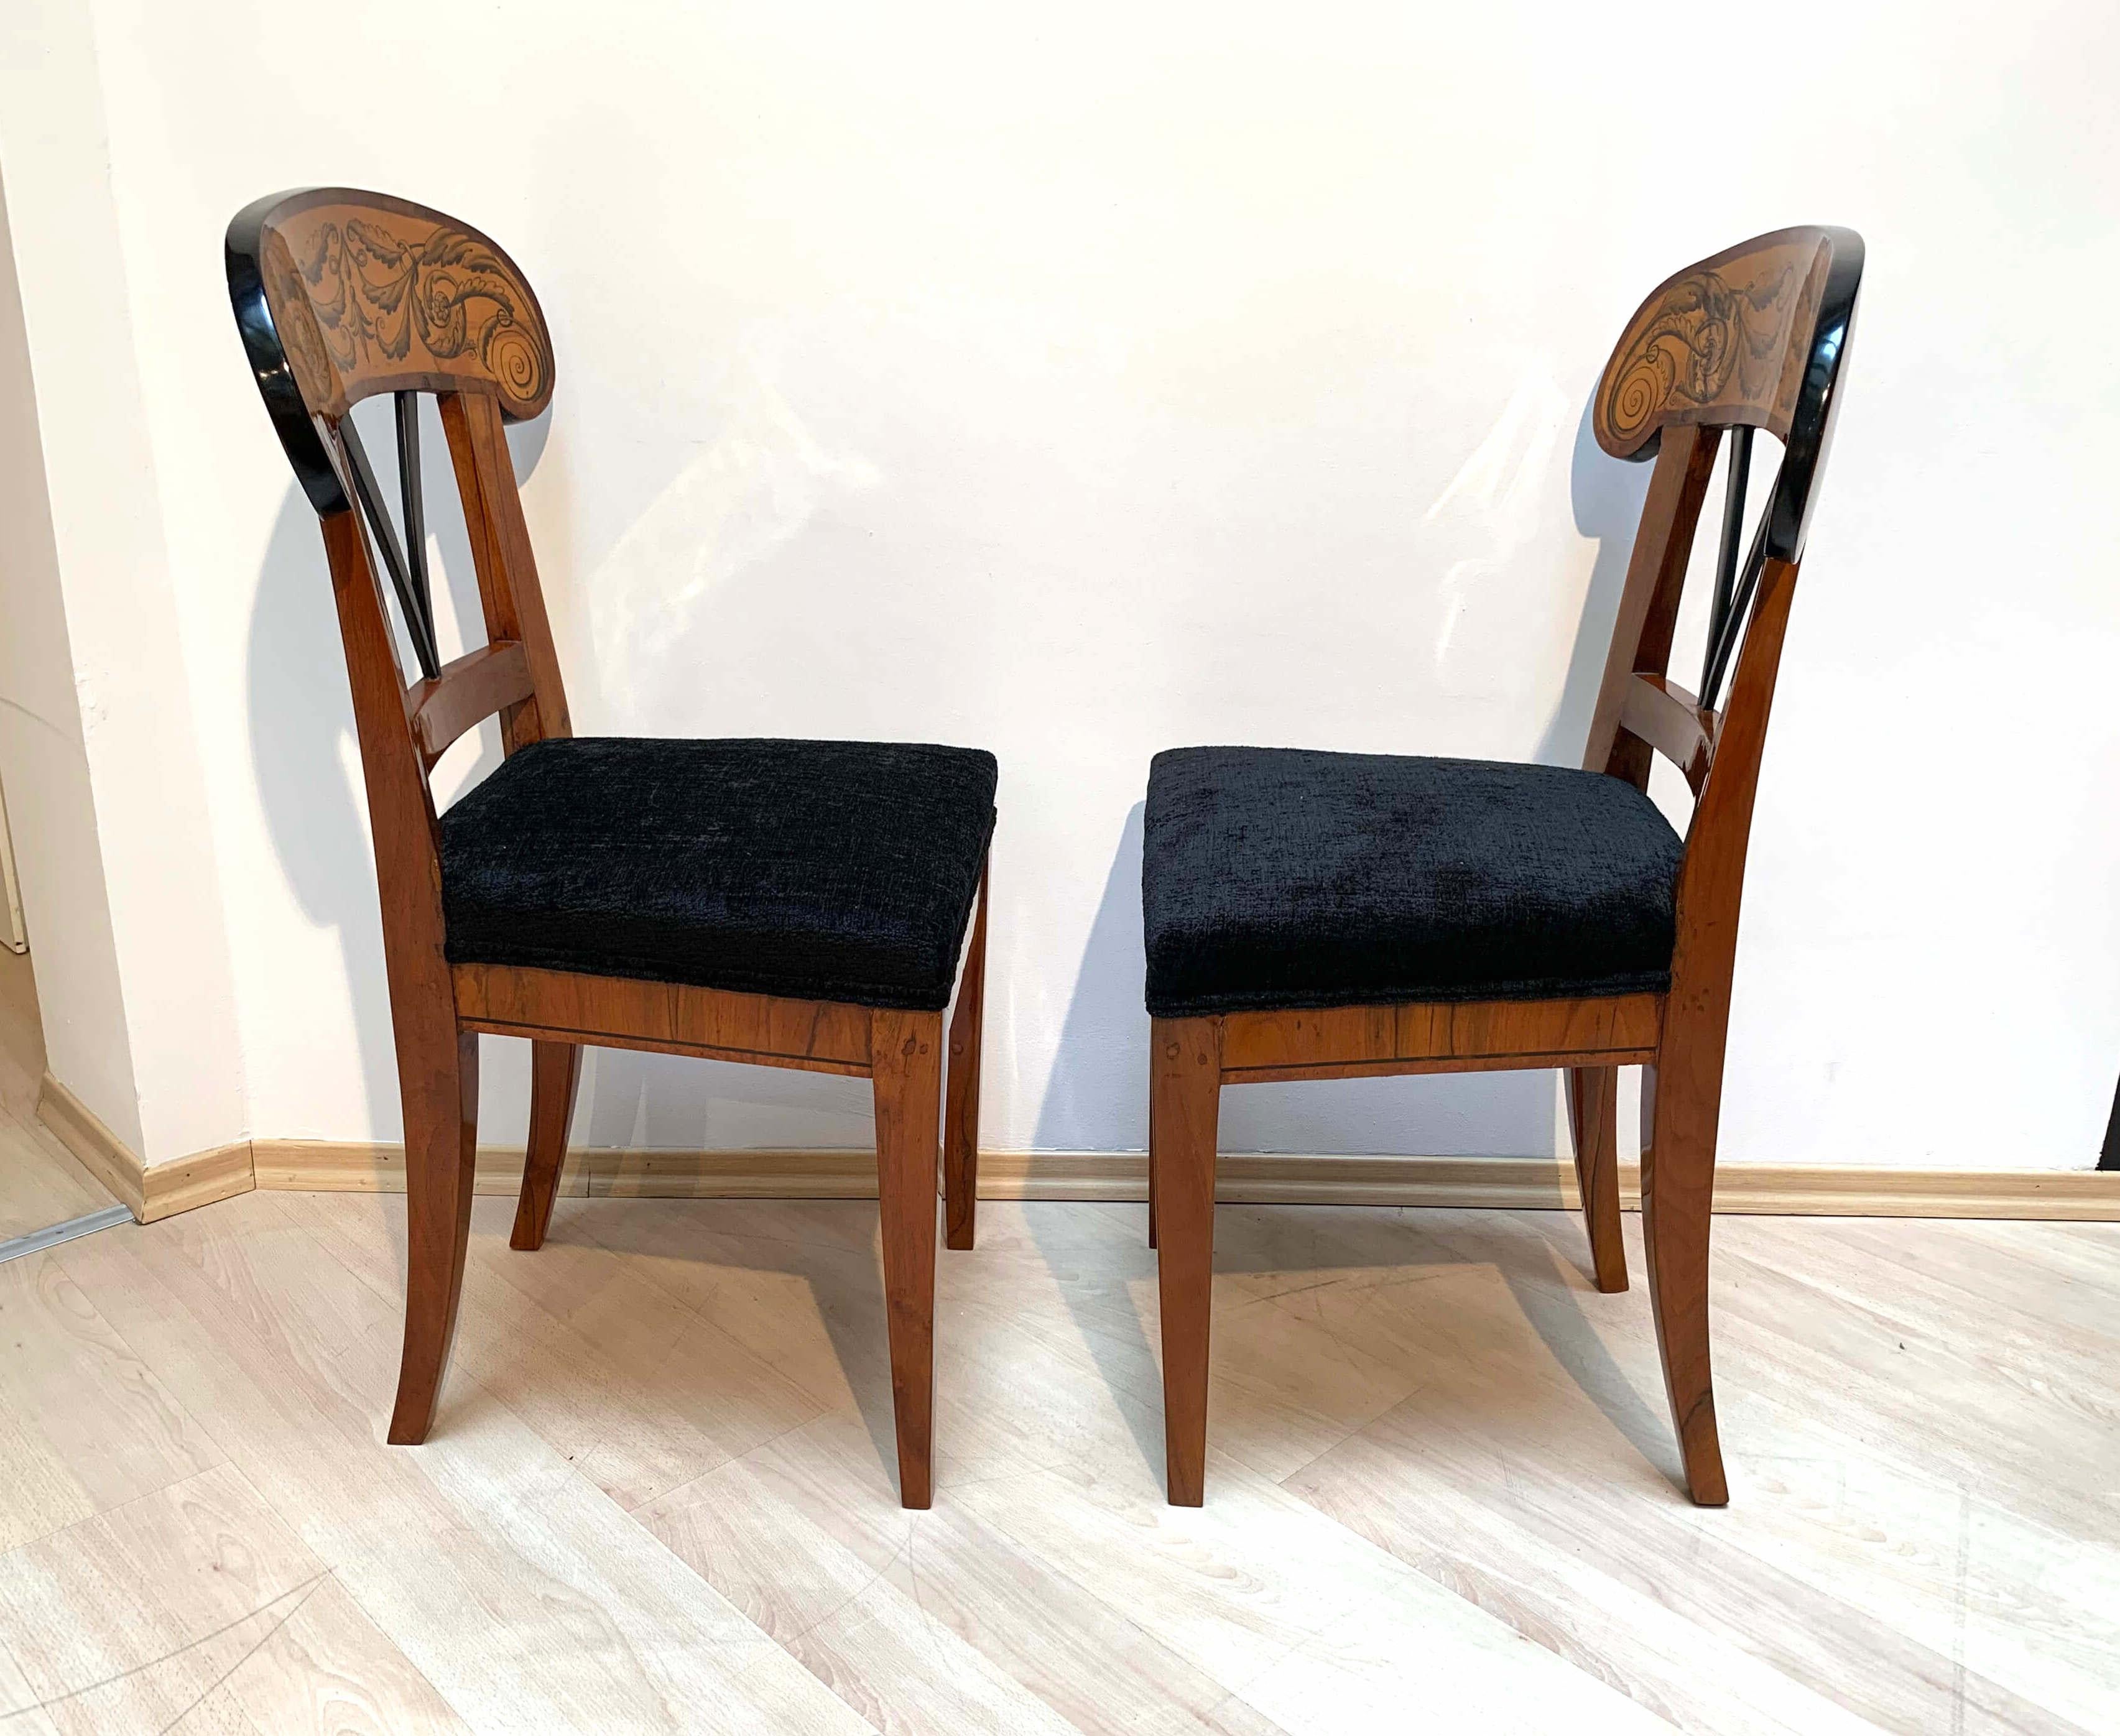 Velvet Pair of Biedermeier Shovel Chairs with Ink Painting, Walnut, South German, 1830s For Sale